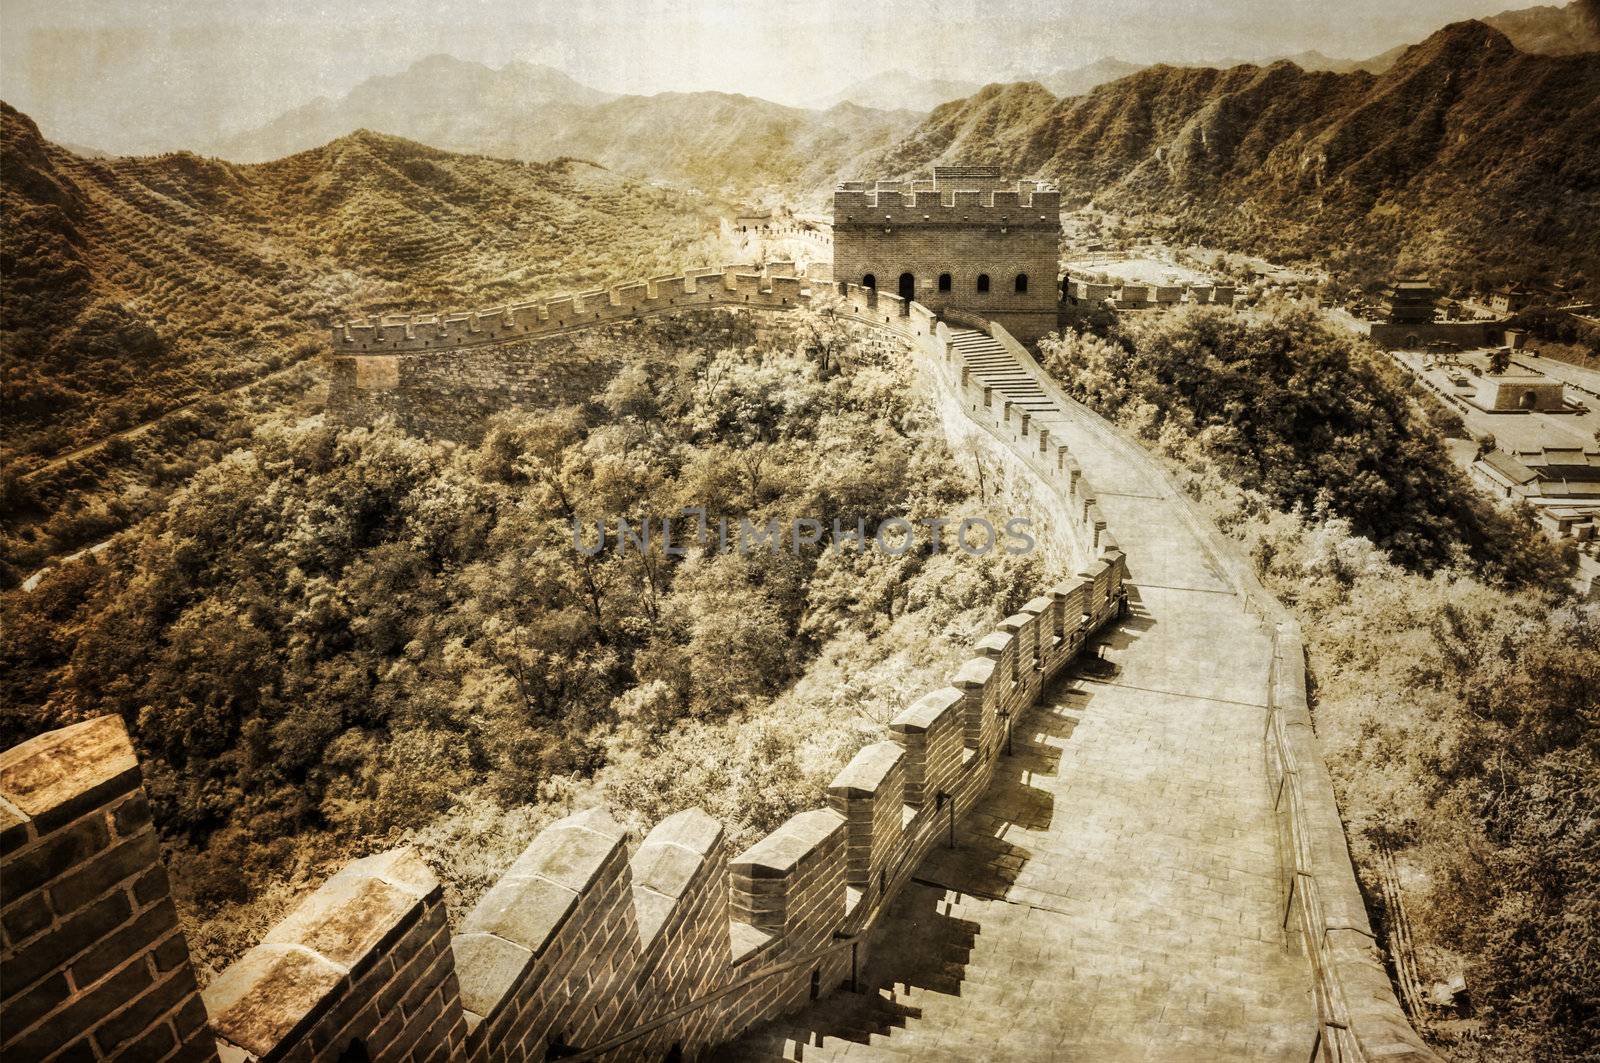 Great wall of China vintage retro view by martinm303